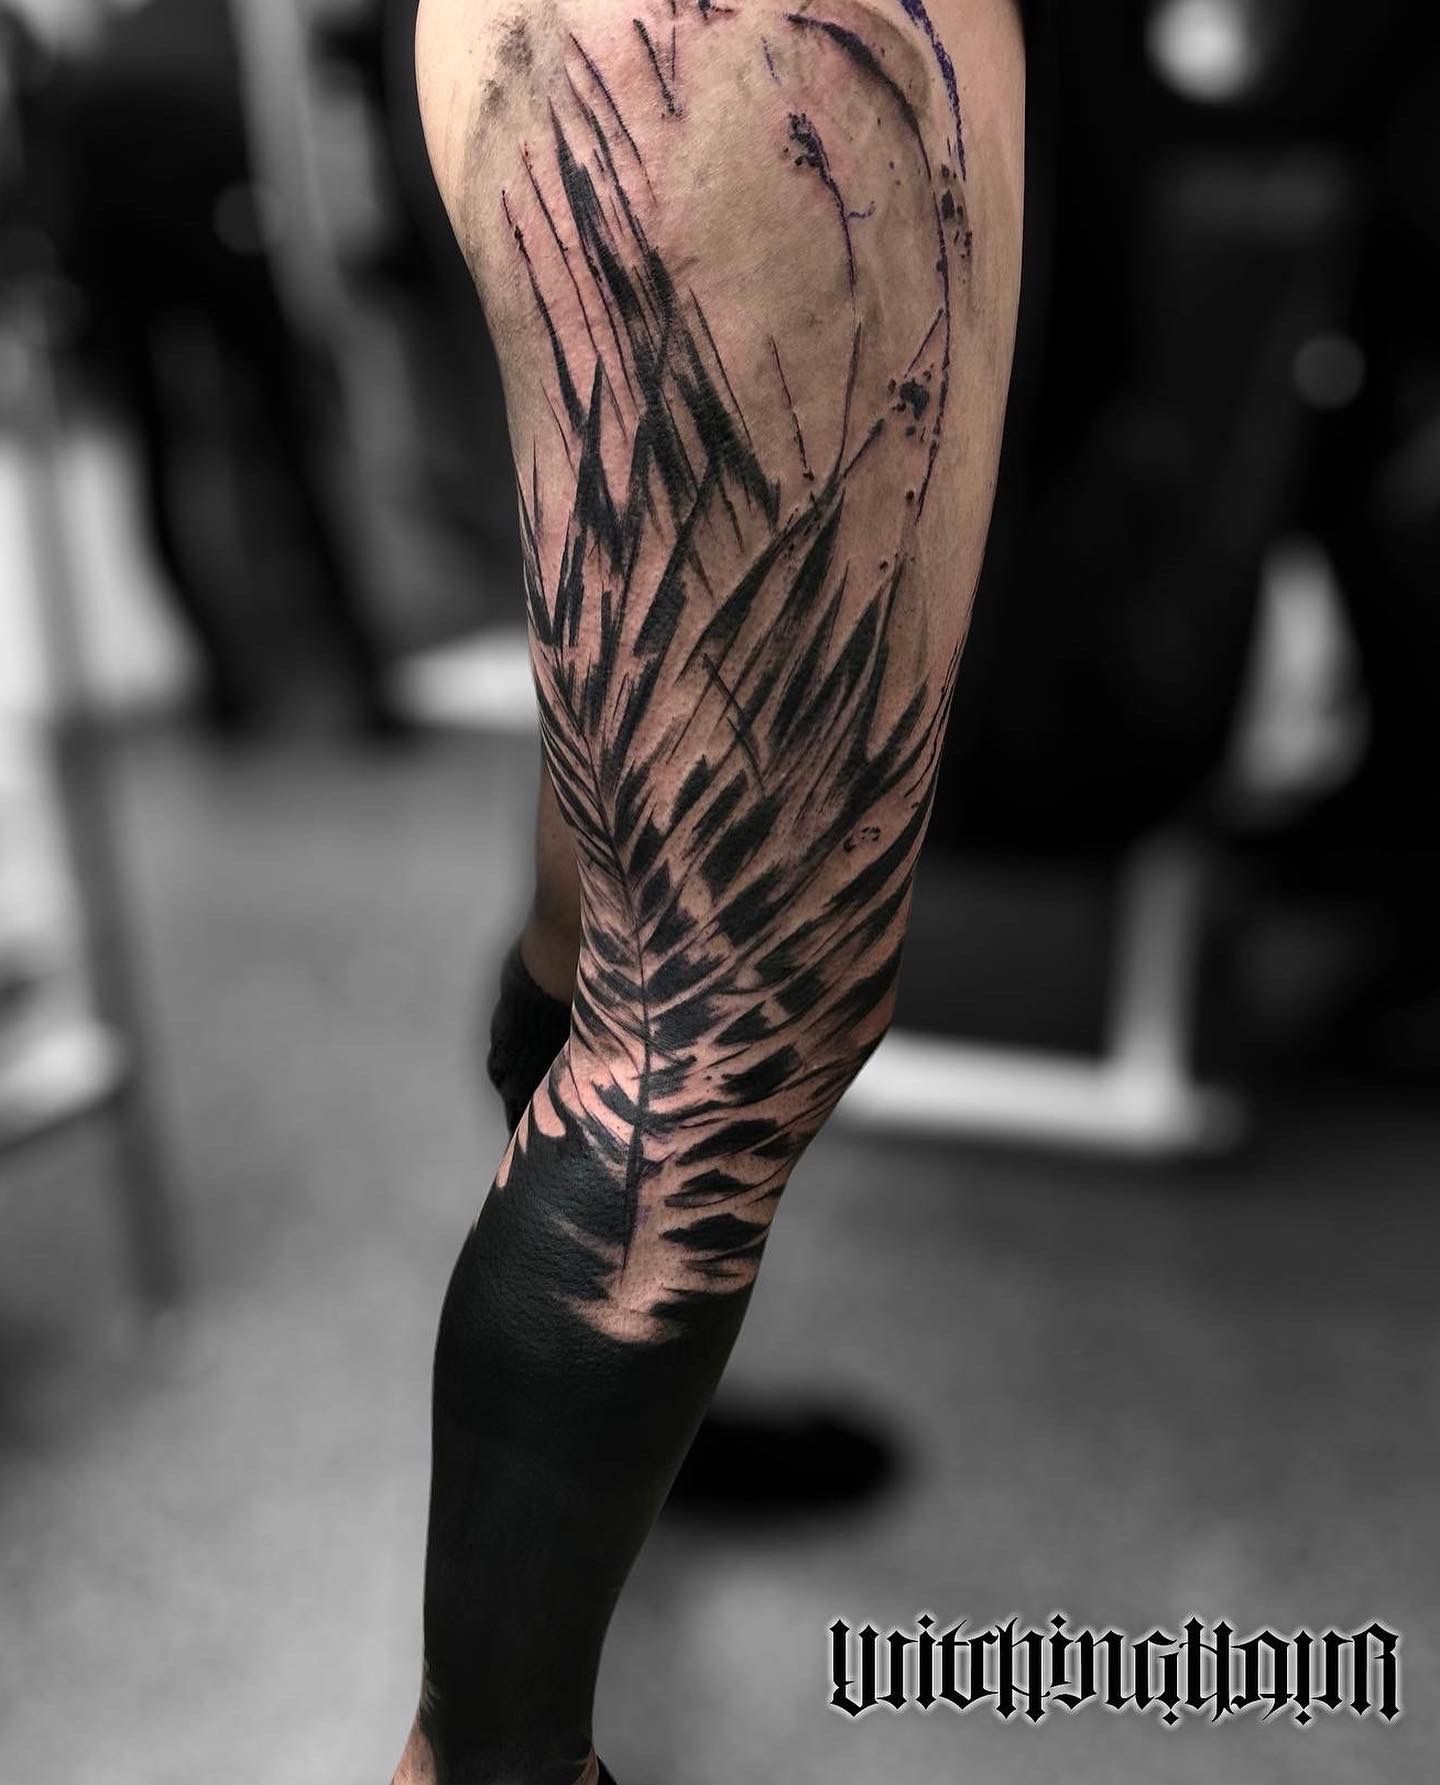 Full arm tattoo sleeve design. Small abstract tiger coming down front of  shoulder, monstera foliage on forearm, beach landscape on bicep tattoo idea  | TattoosAI